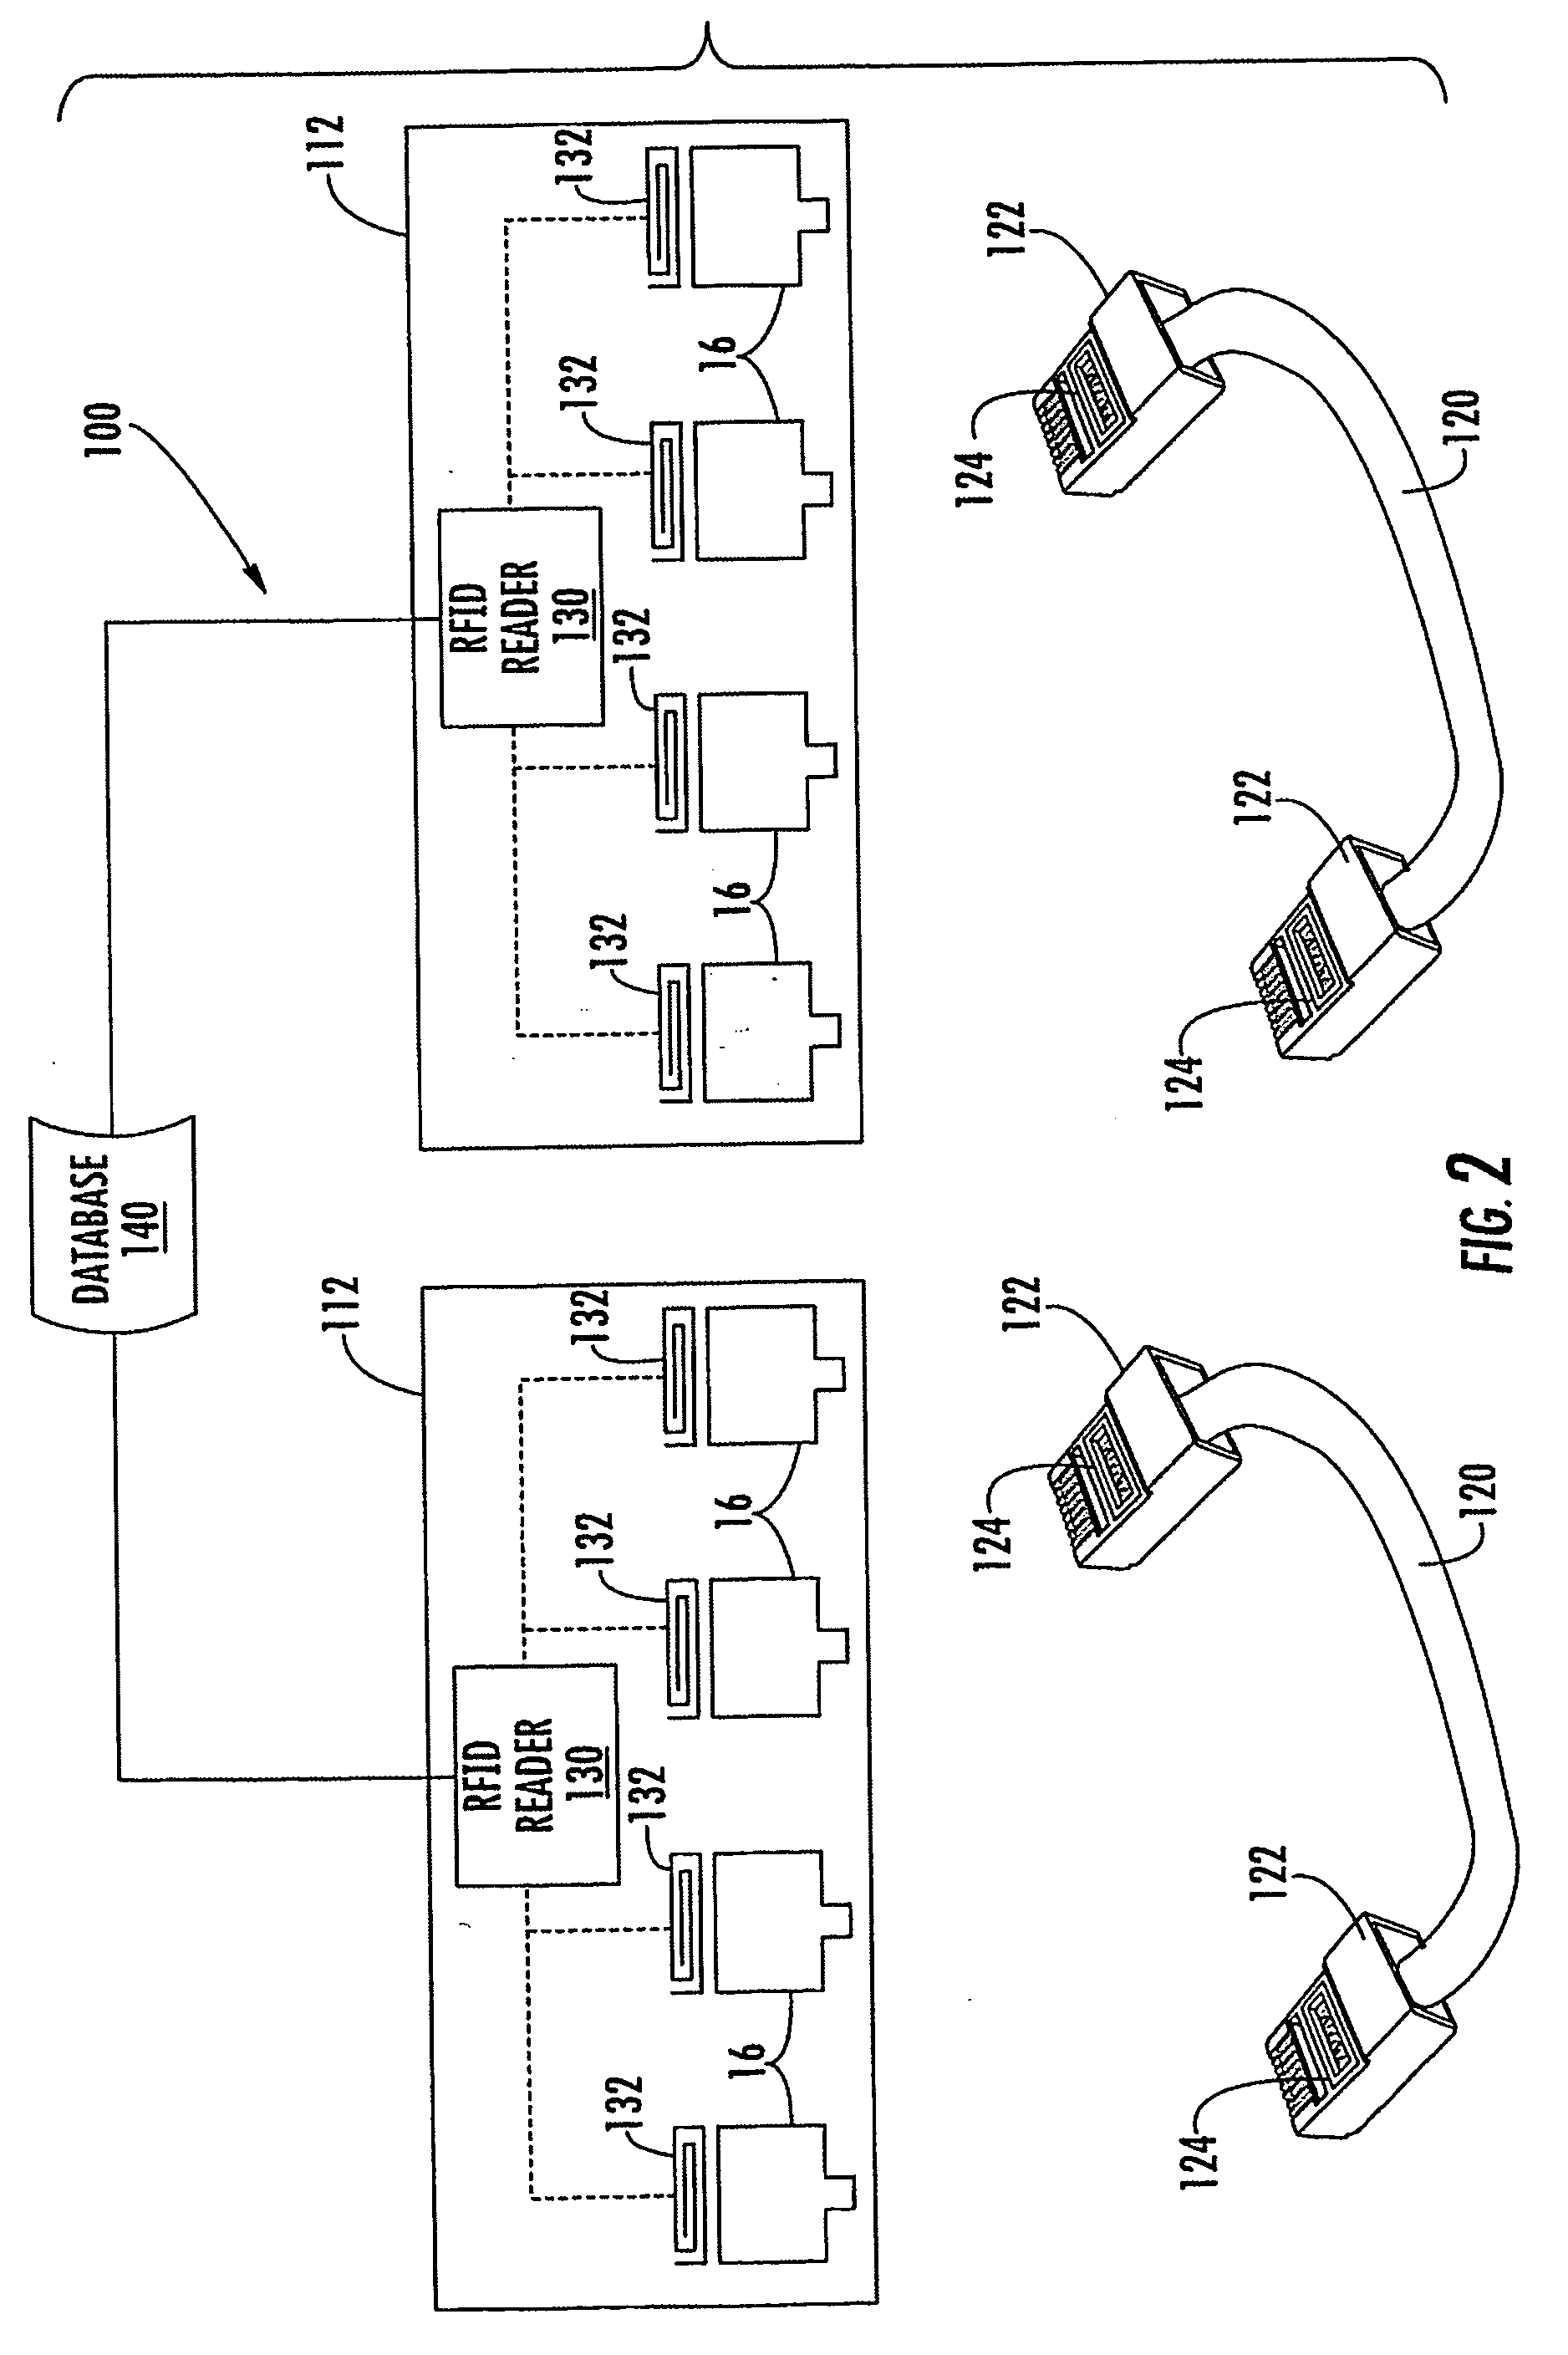 Telecommunications patching system that utilizes RFID tags to detect and identify patch cord interconnections